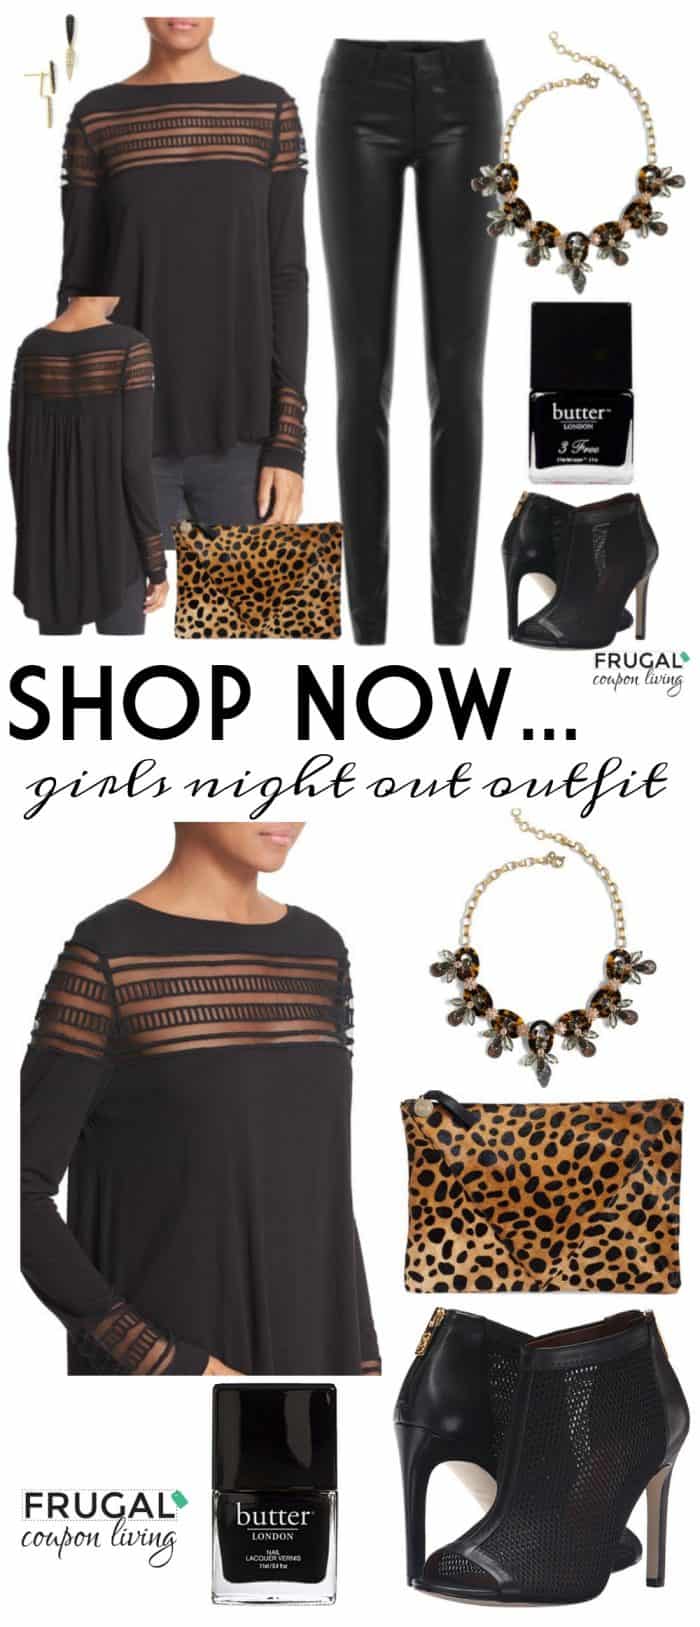 girls-night-out-outfit-frugal-coupon-living-frugal-fashion-friday-long